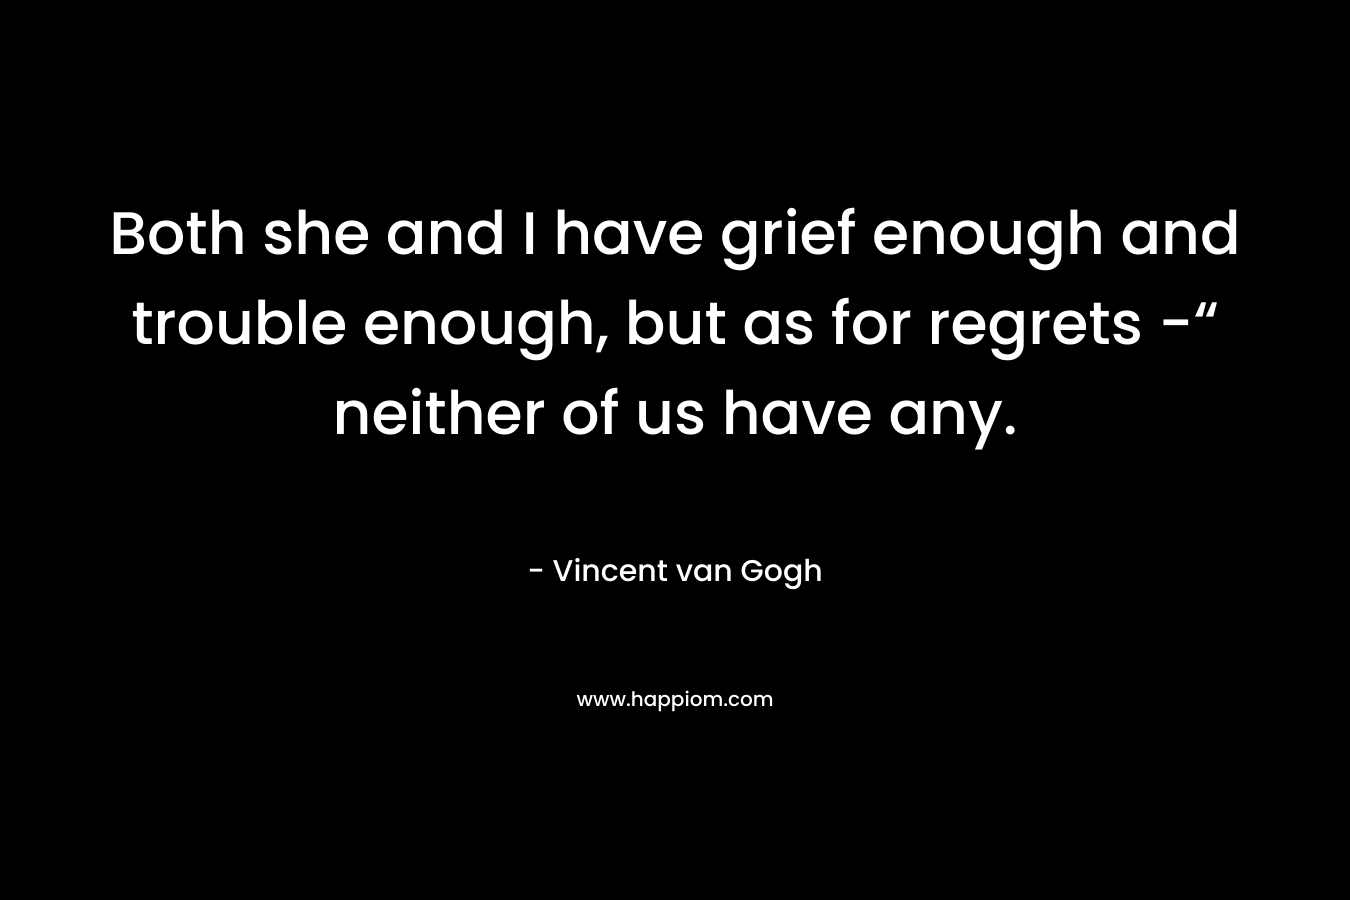 Both she and I have grief enough and trouble enough, but as for regrets -“ neither of us have any.